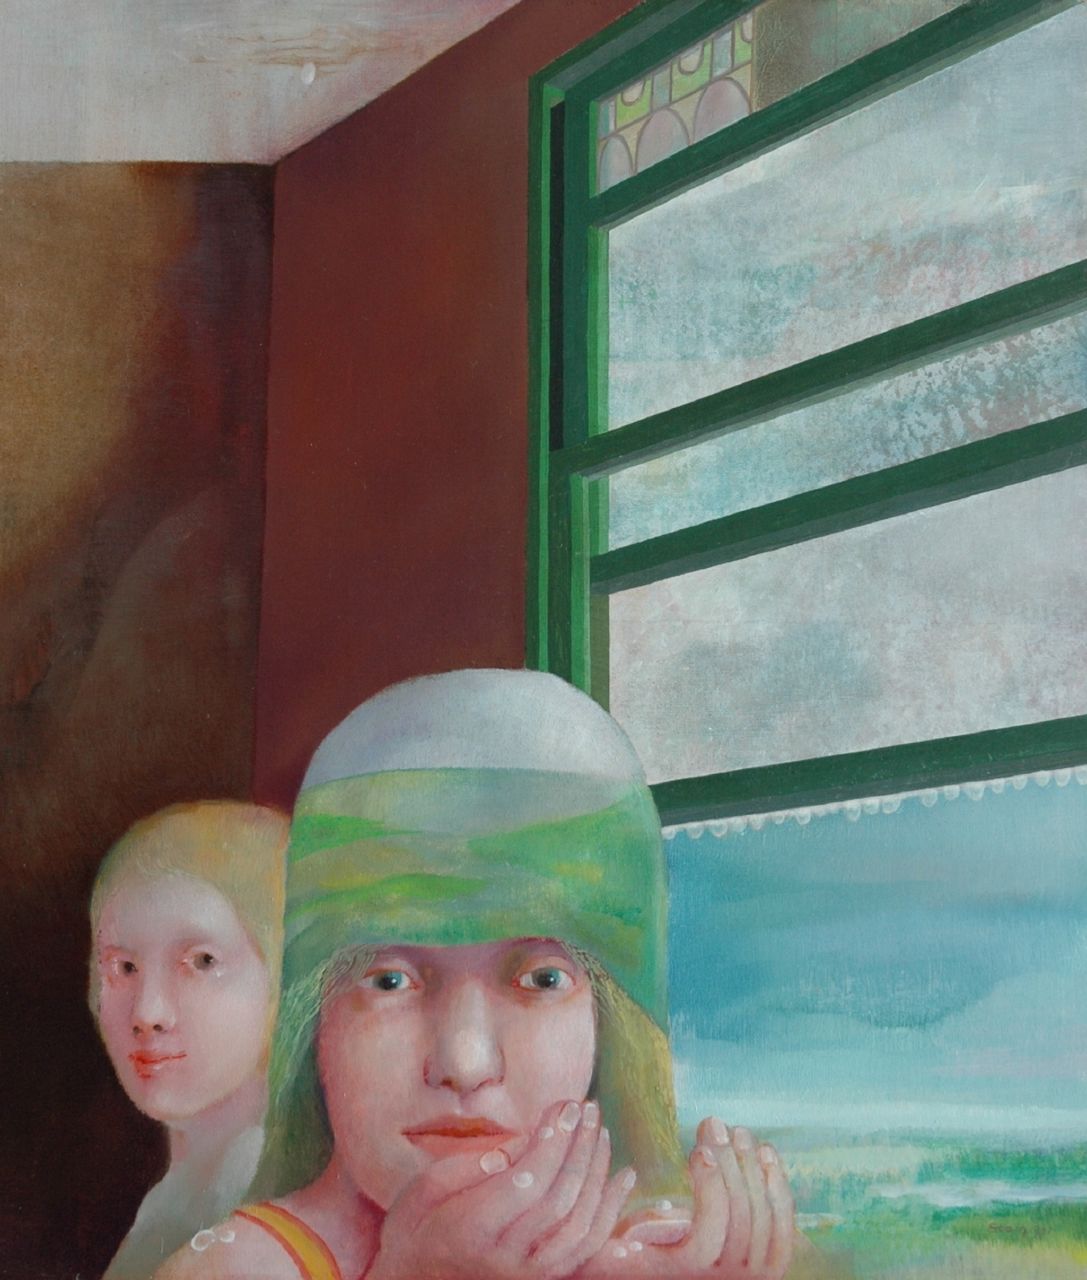 Martin Stam | Flevopolder I, oil on painter's board, 60.0 x 52.2 cm, signed l.r. and painted 1971